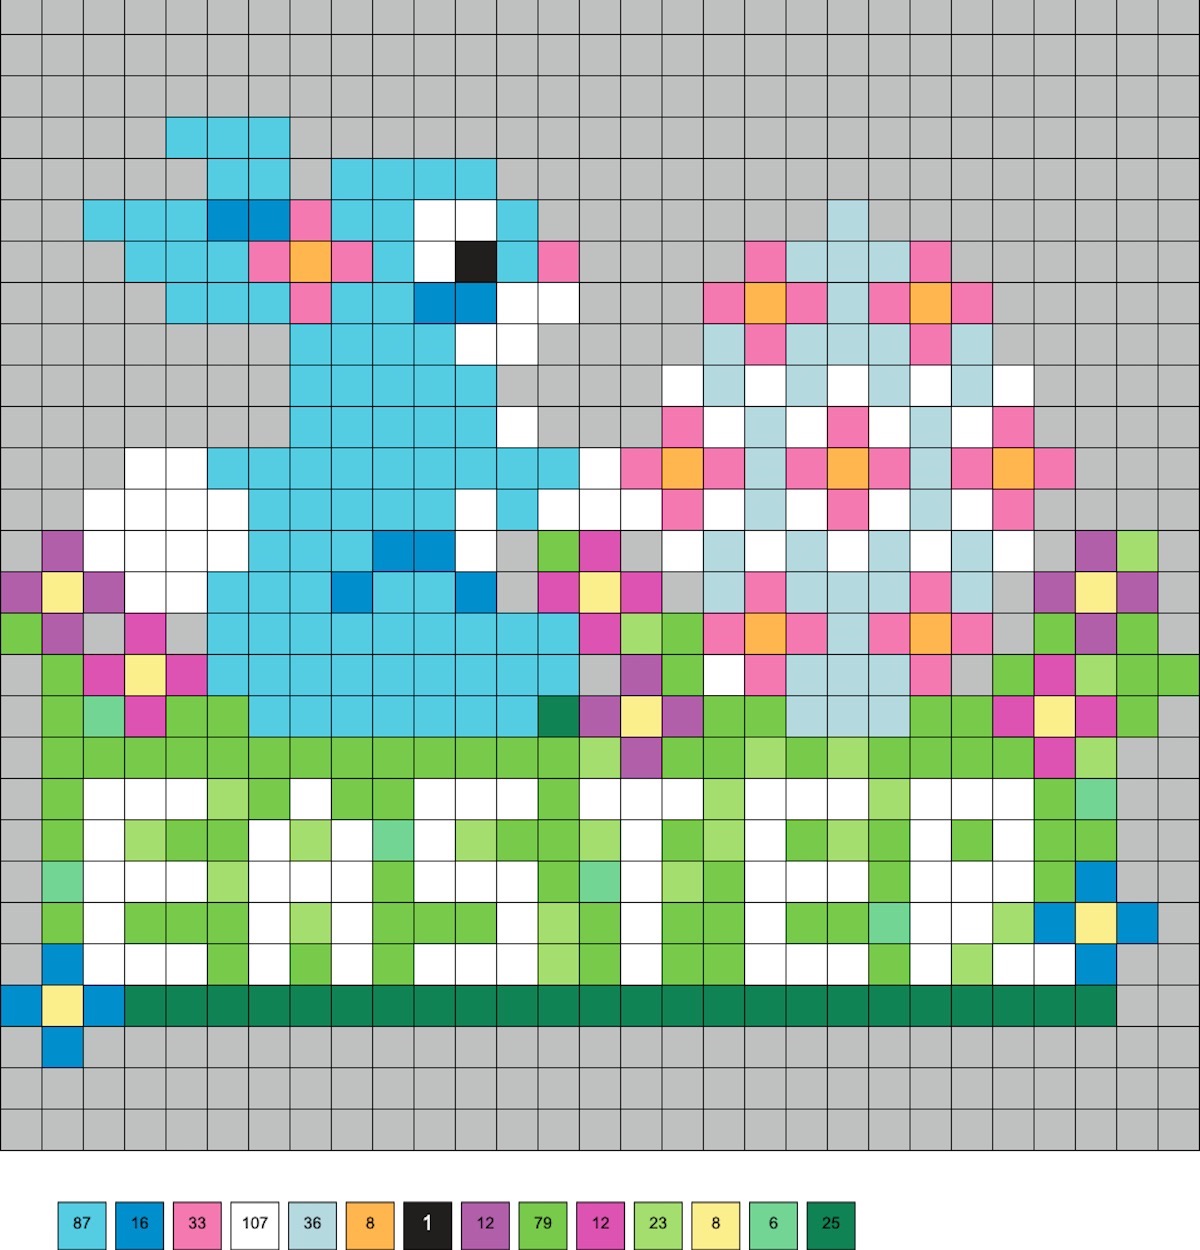 10 Easter Perler Bead Patterns and Ideas! - Keep Calm And Mommy On